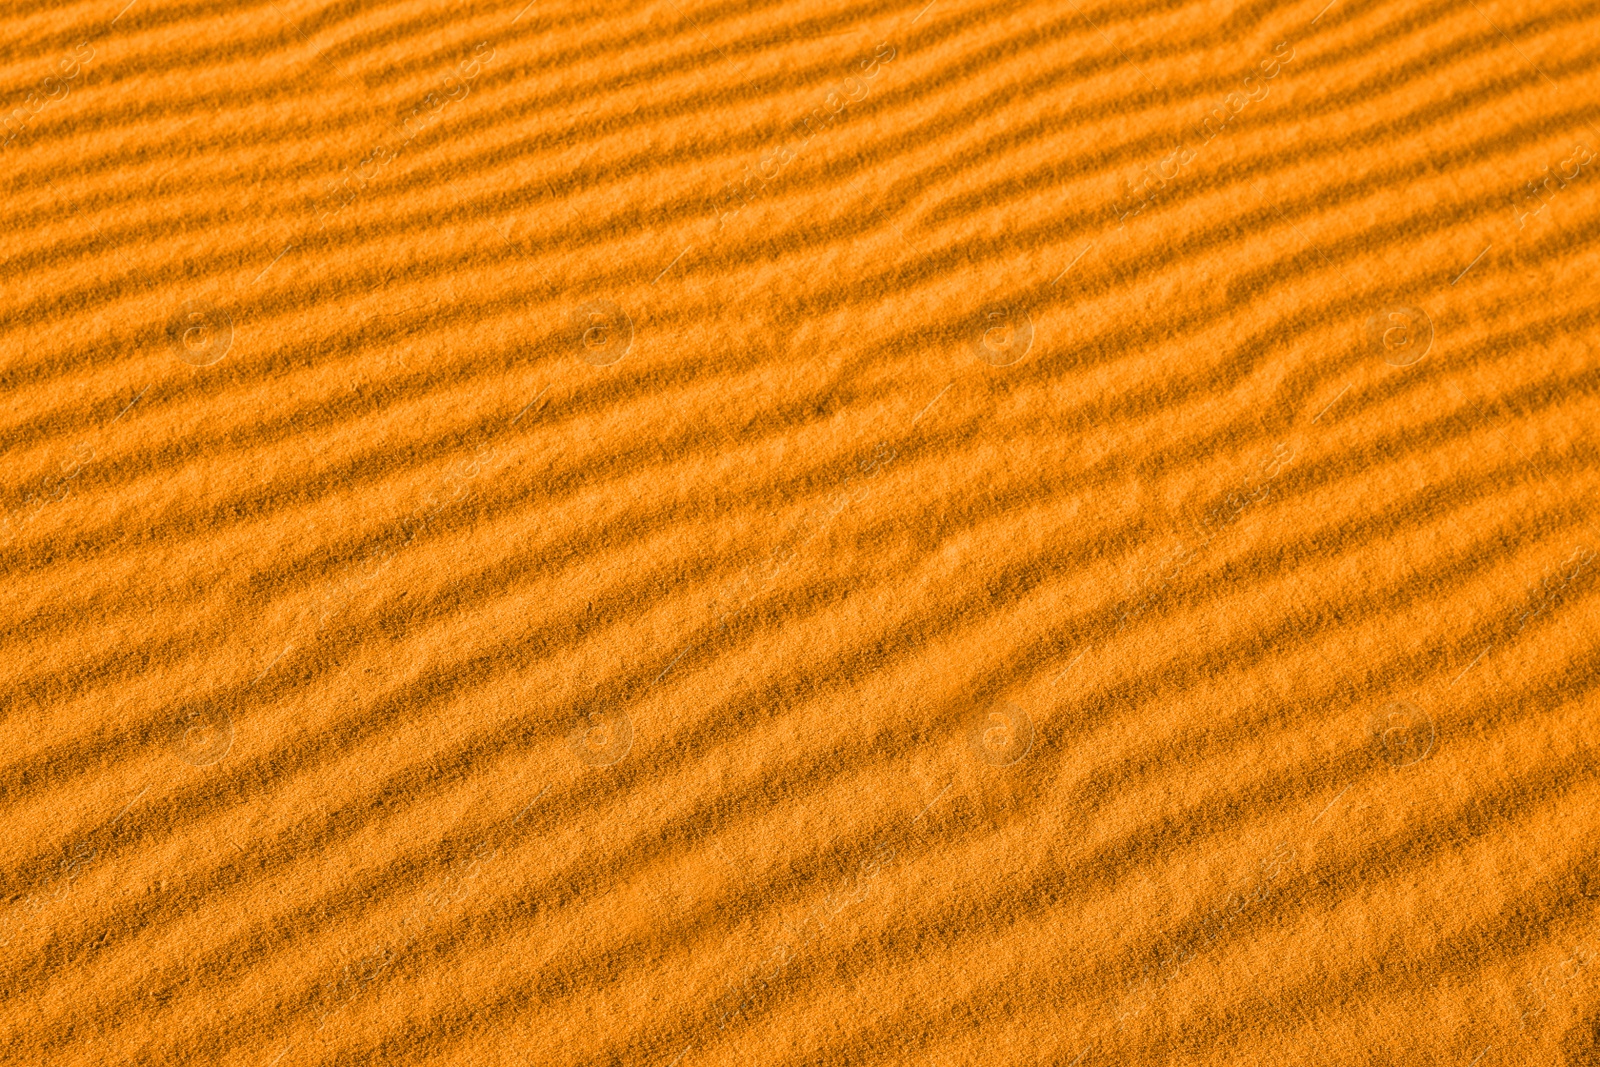 Image of Closeup view of orange sand dune in desert as background